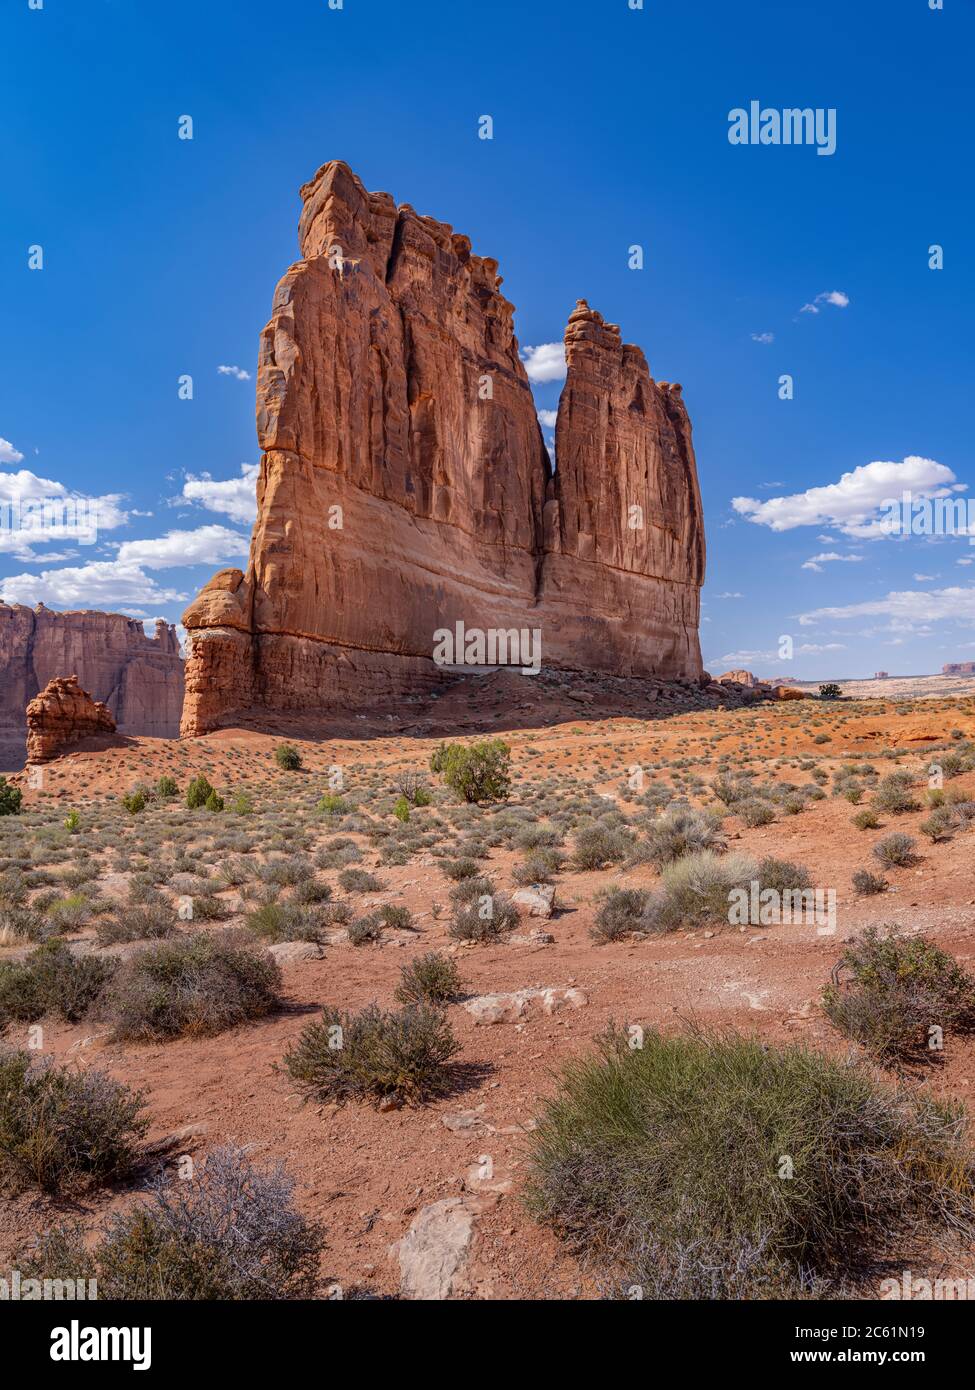 Courthouse Tower, Arches National Park, Utah, USA Foto Stock